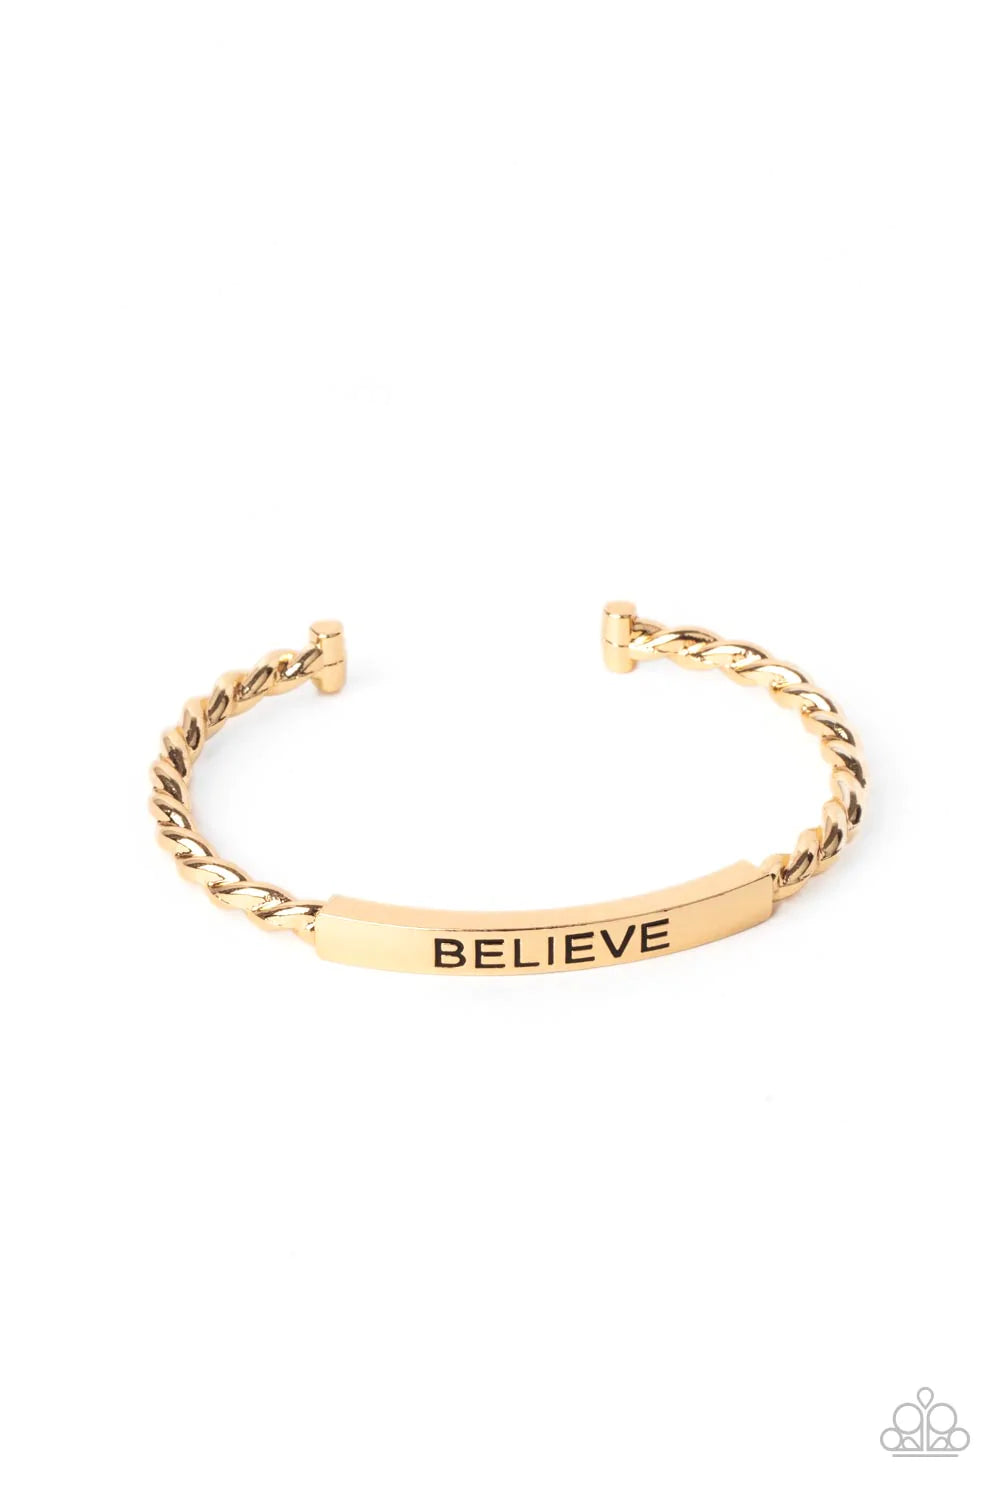 "Keep Calm and Believe" - Gold #756 - Paparazzi Accessories